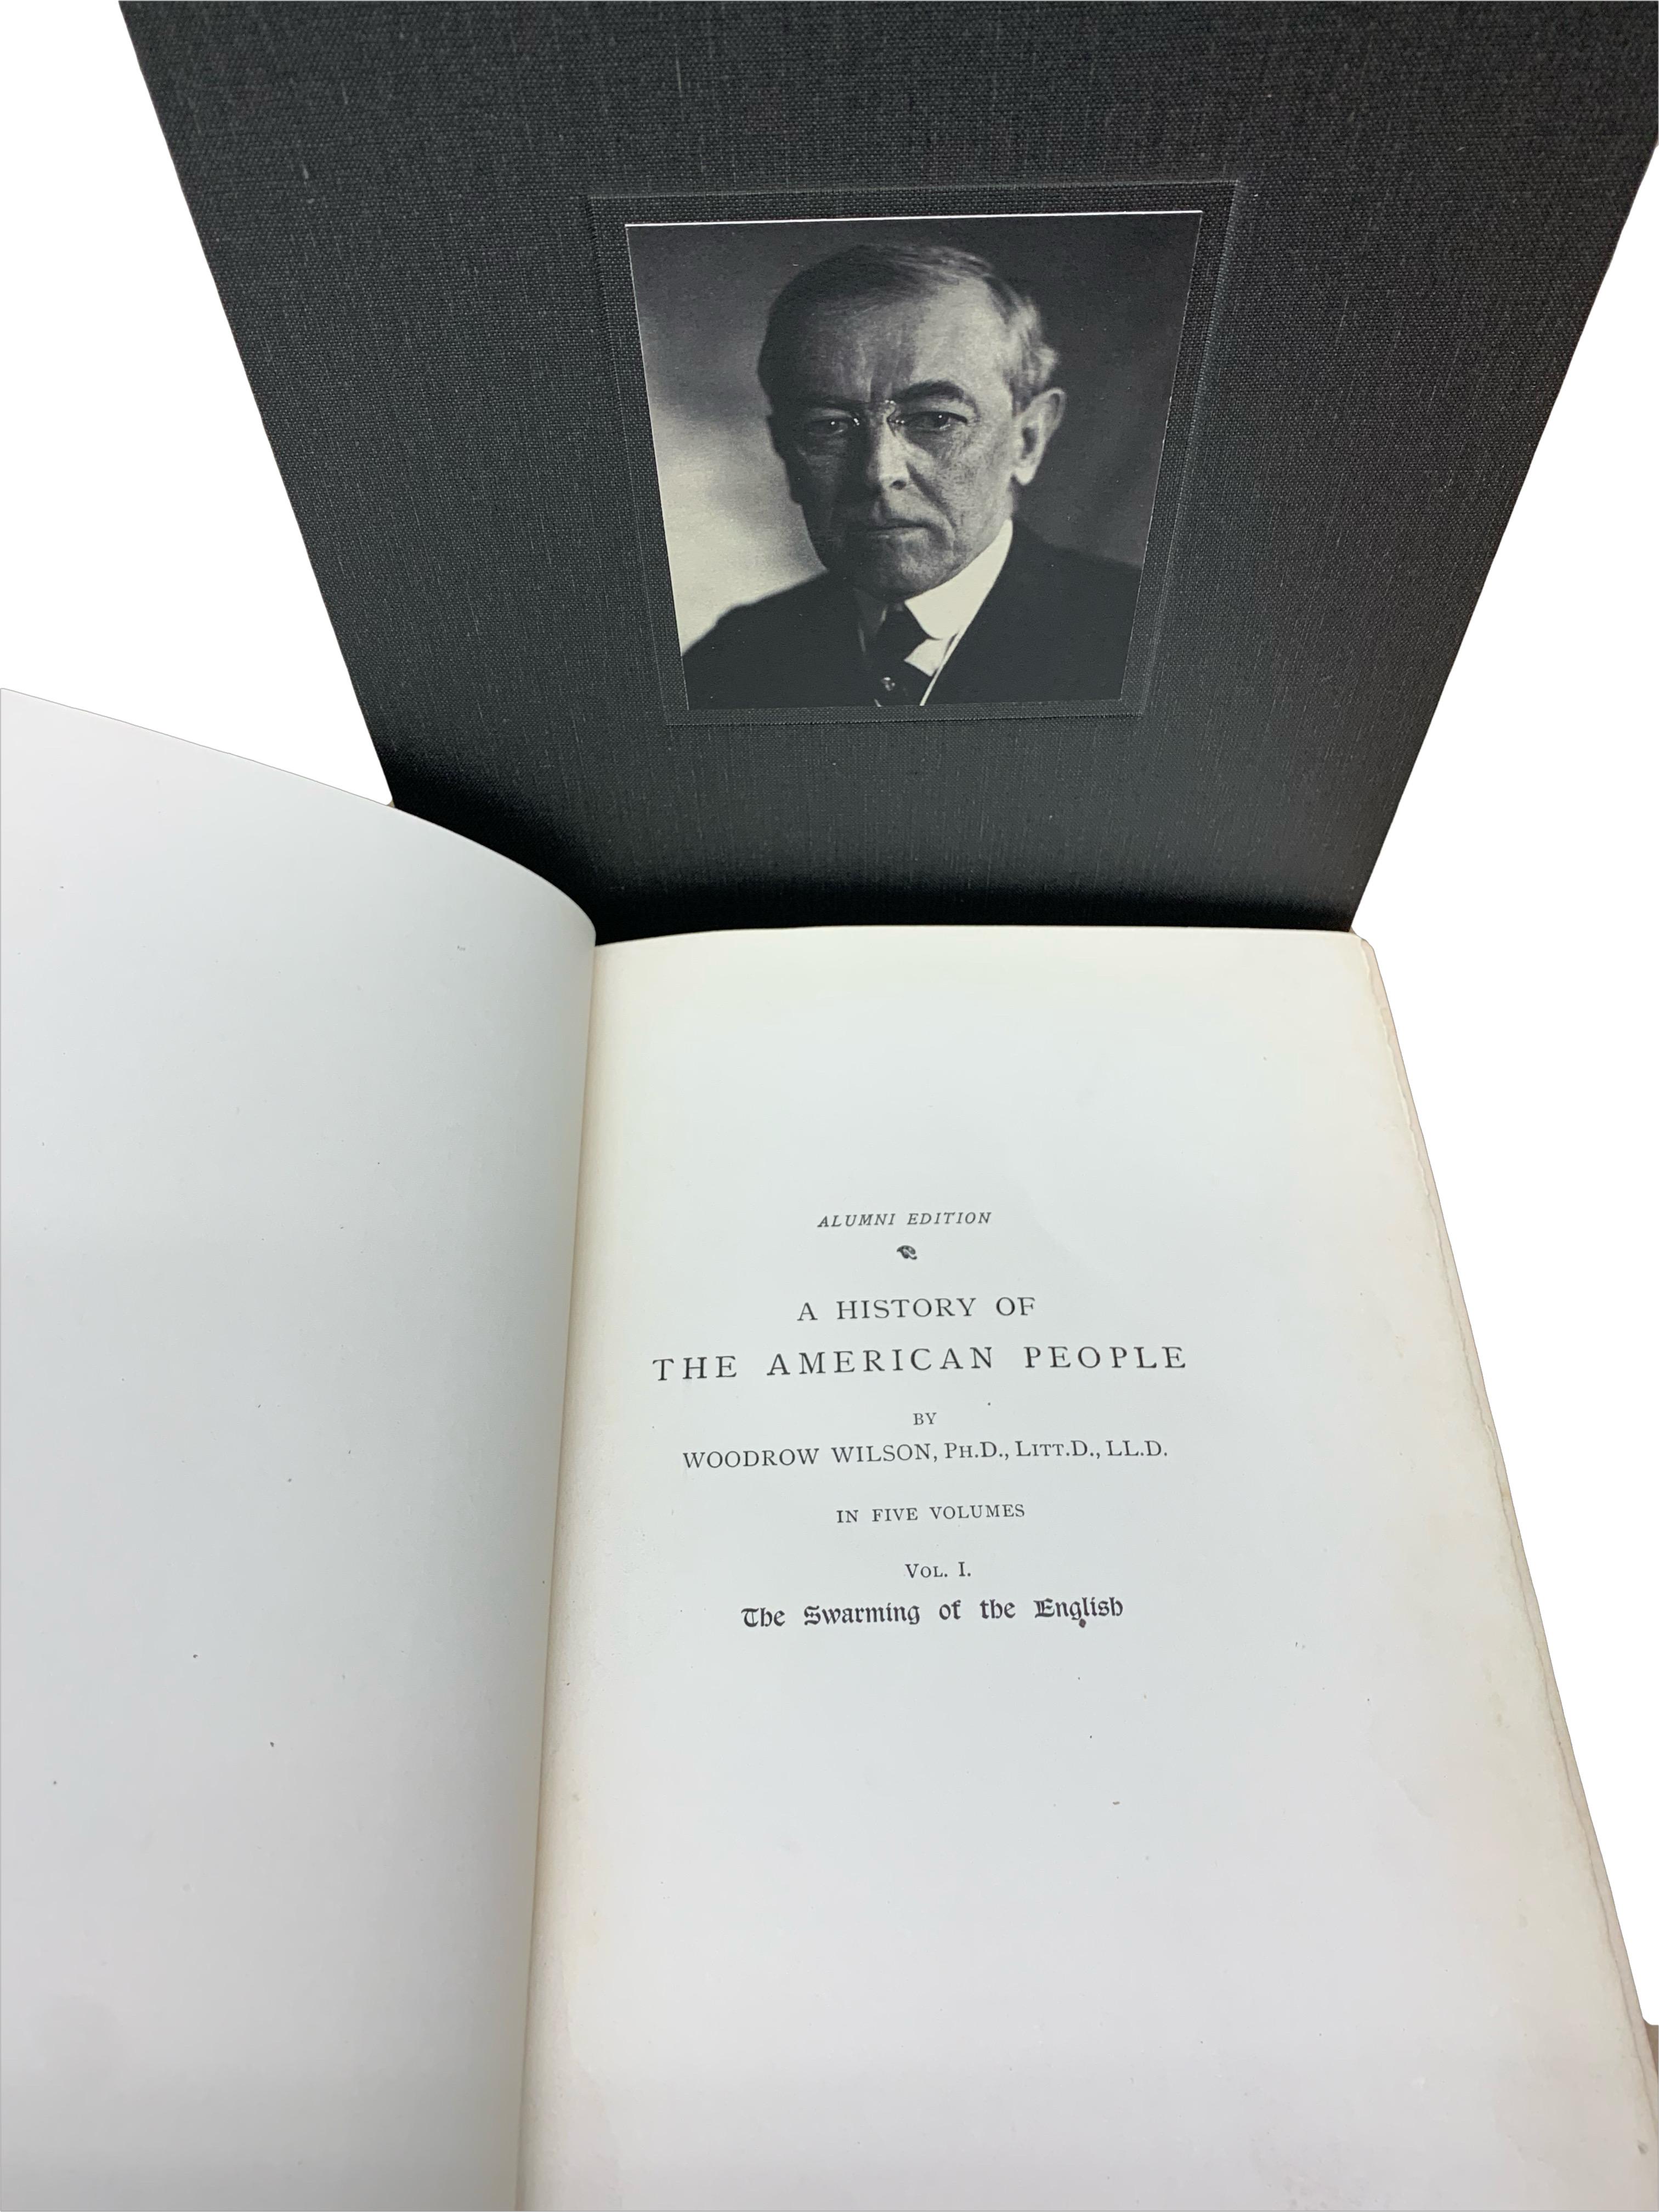 Paper A History of the American People, Signed by Woodrow Wilson, Alumni Edition #29 o For Sale